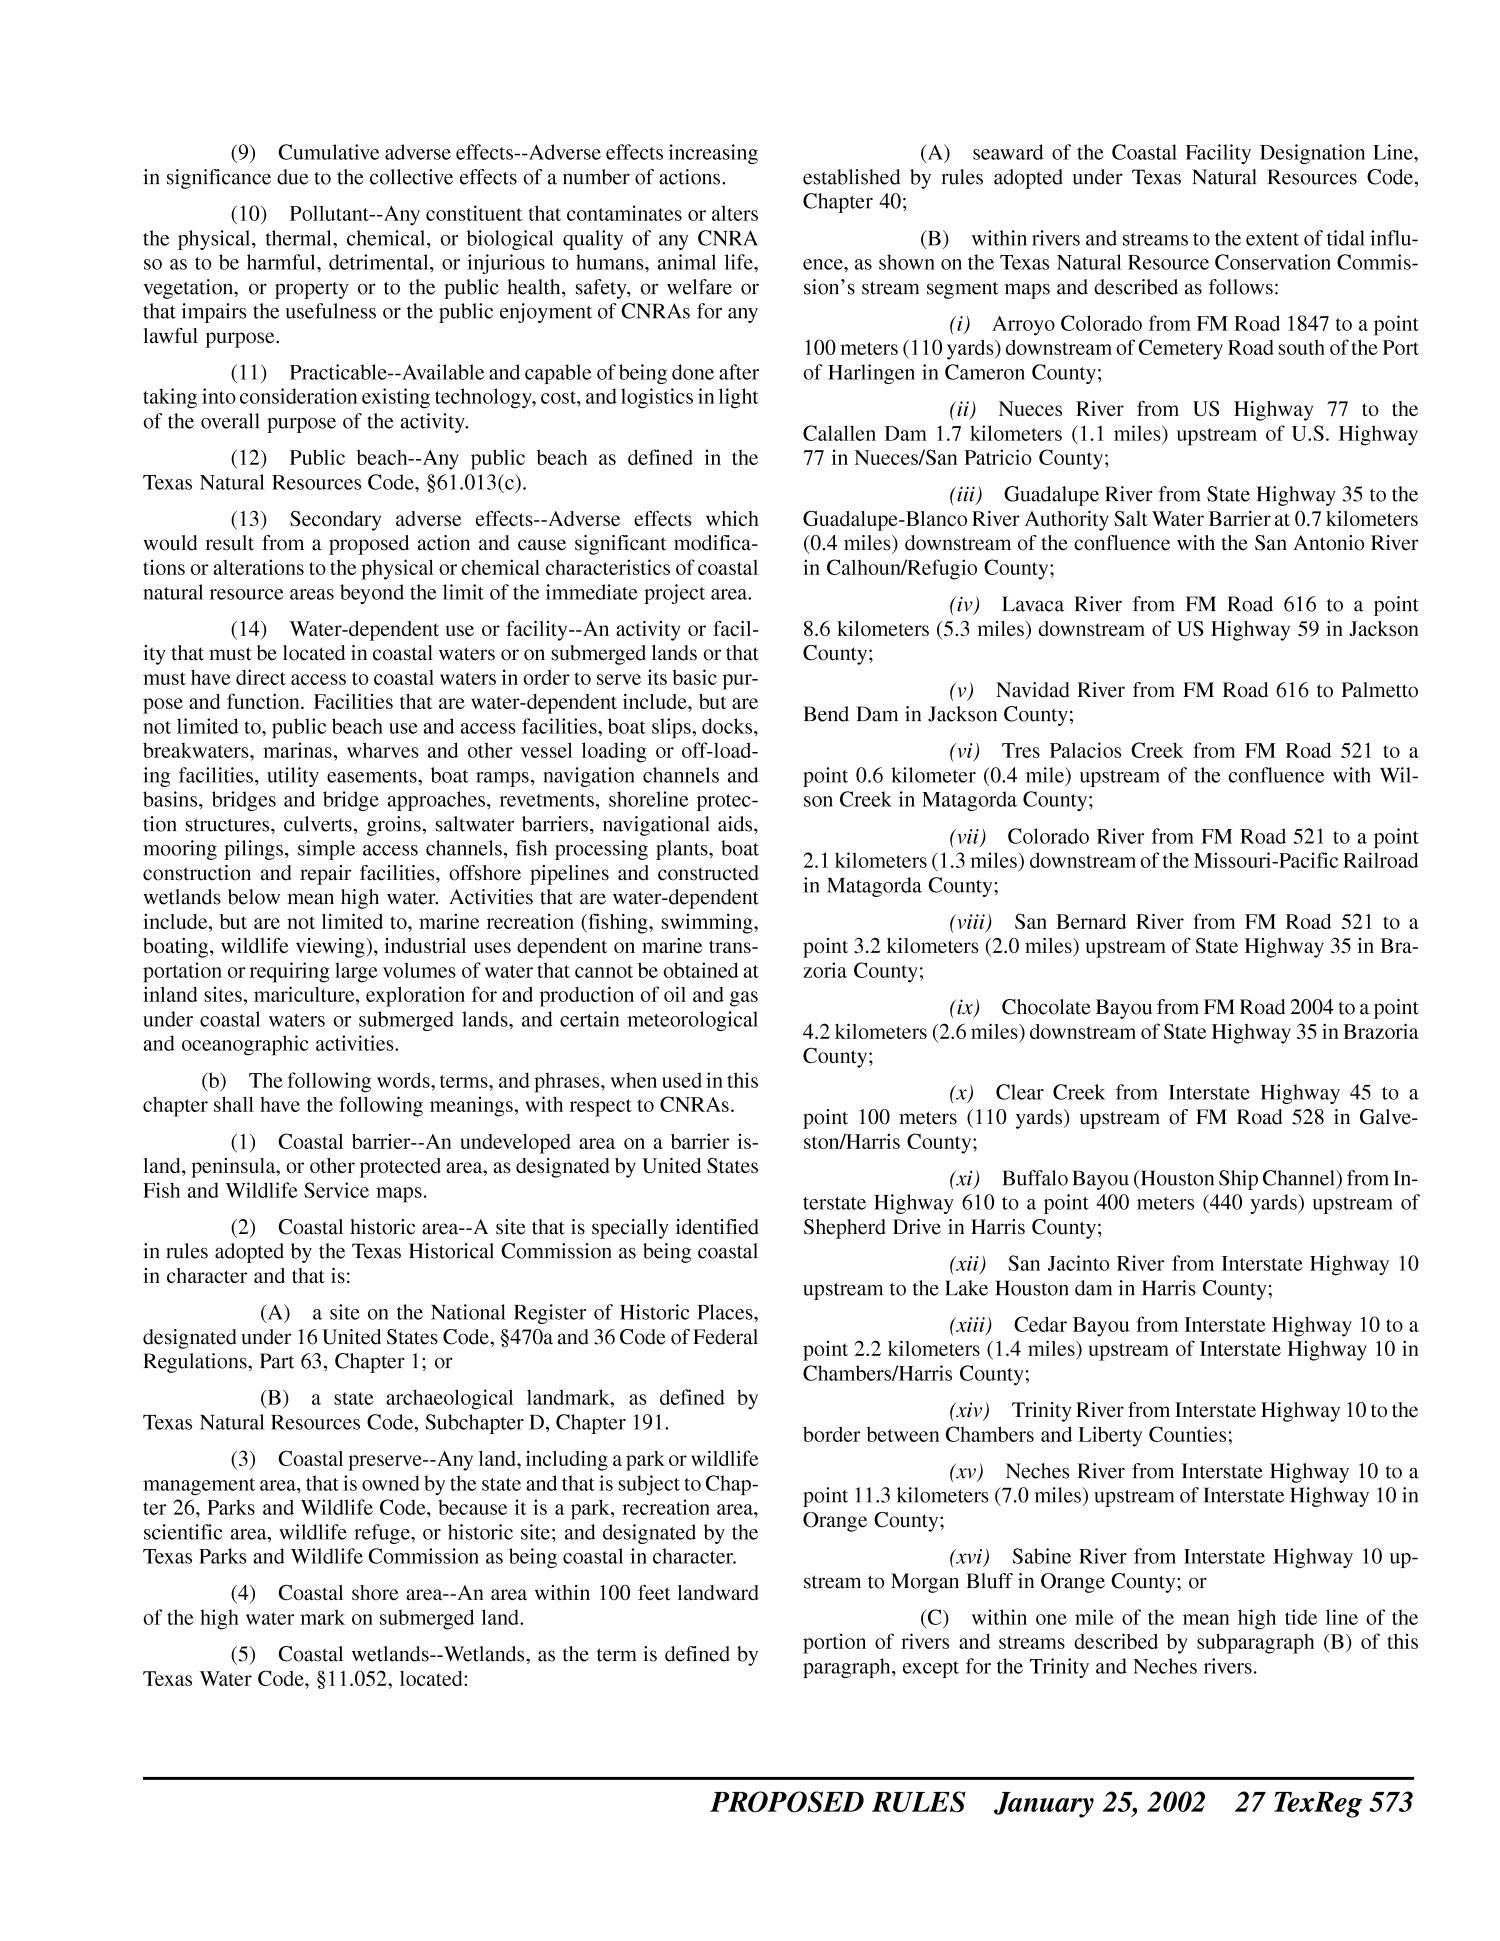 Texas Register, Volume 27, Number 4, Pages 529-656, January 25, 2002
                                                
                                                    573
                                                